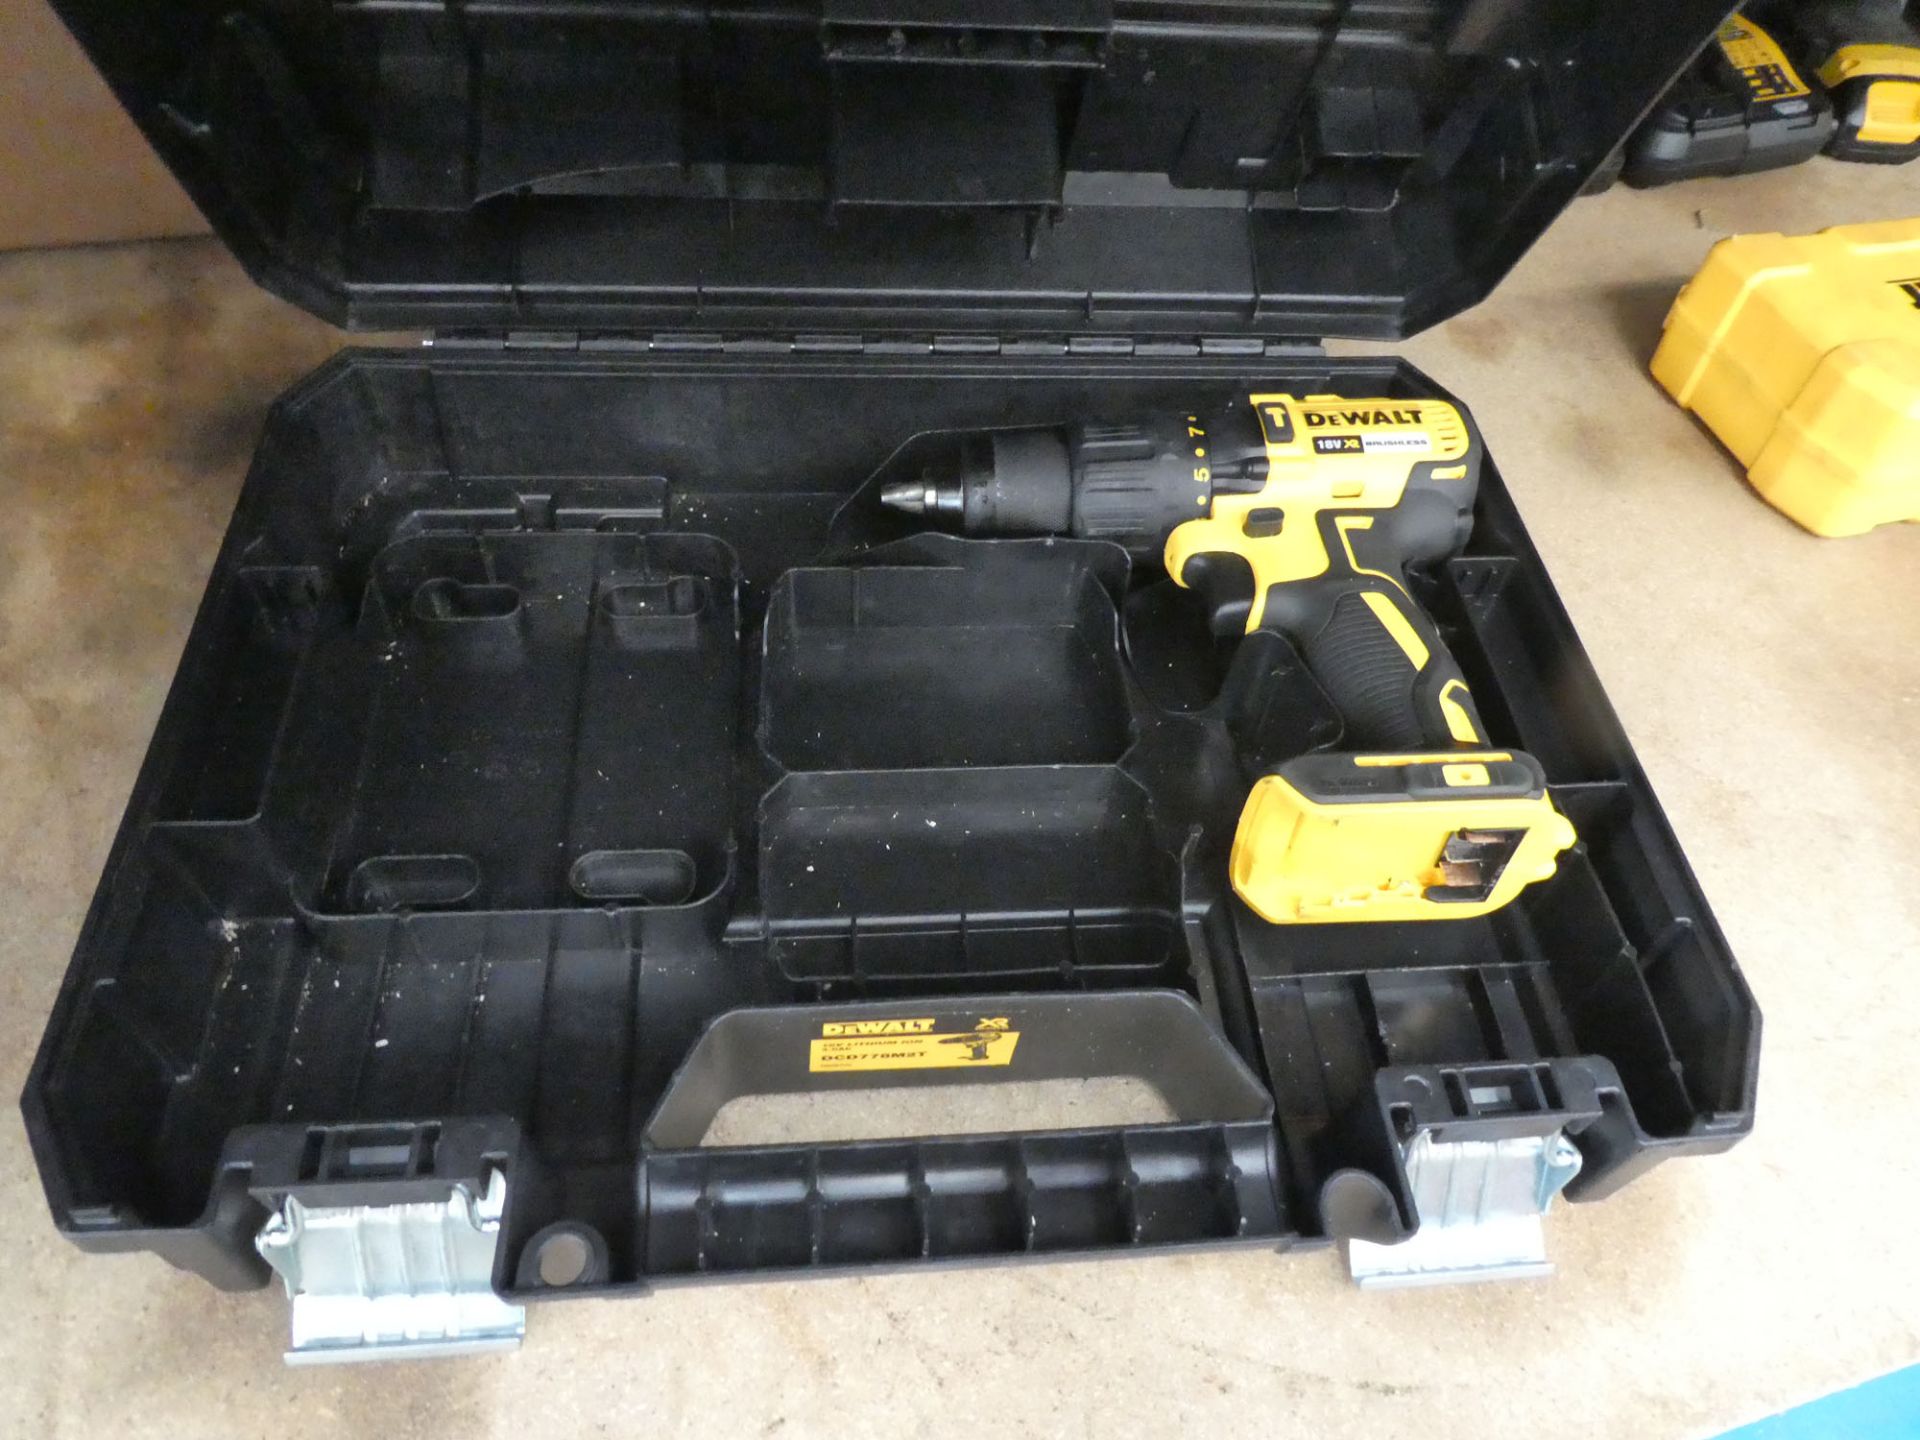 DeWalt 18v cordless drill body (no battery or charger)